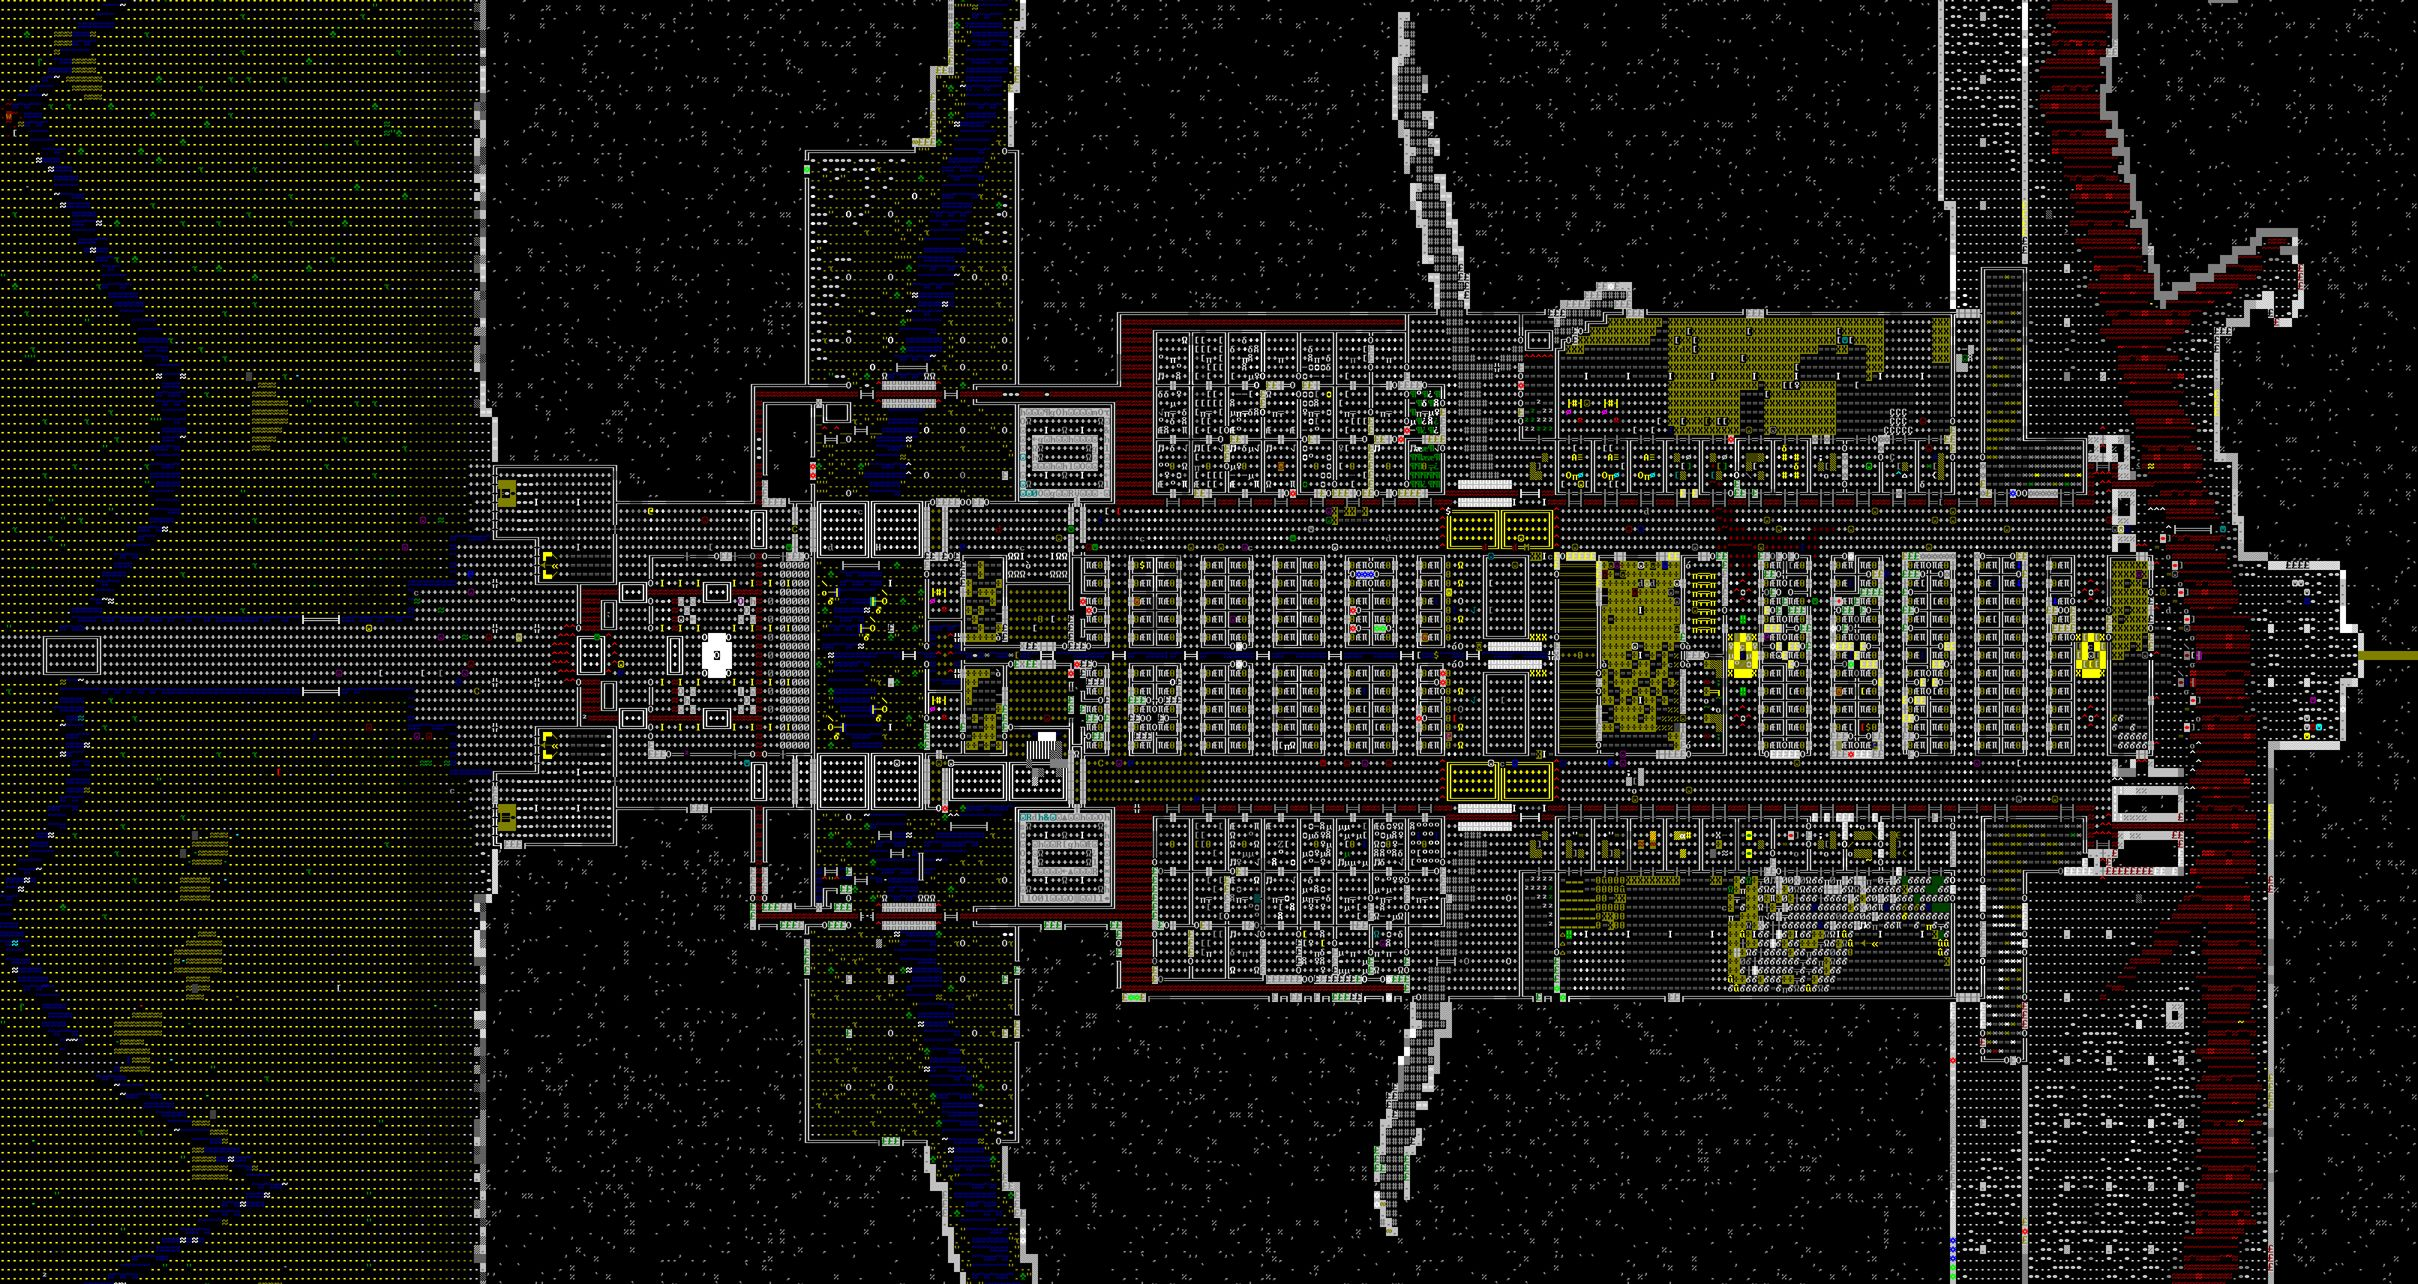 Dwarf Fortress Image Crazy Gallery